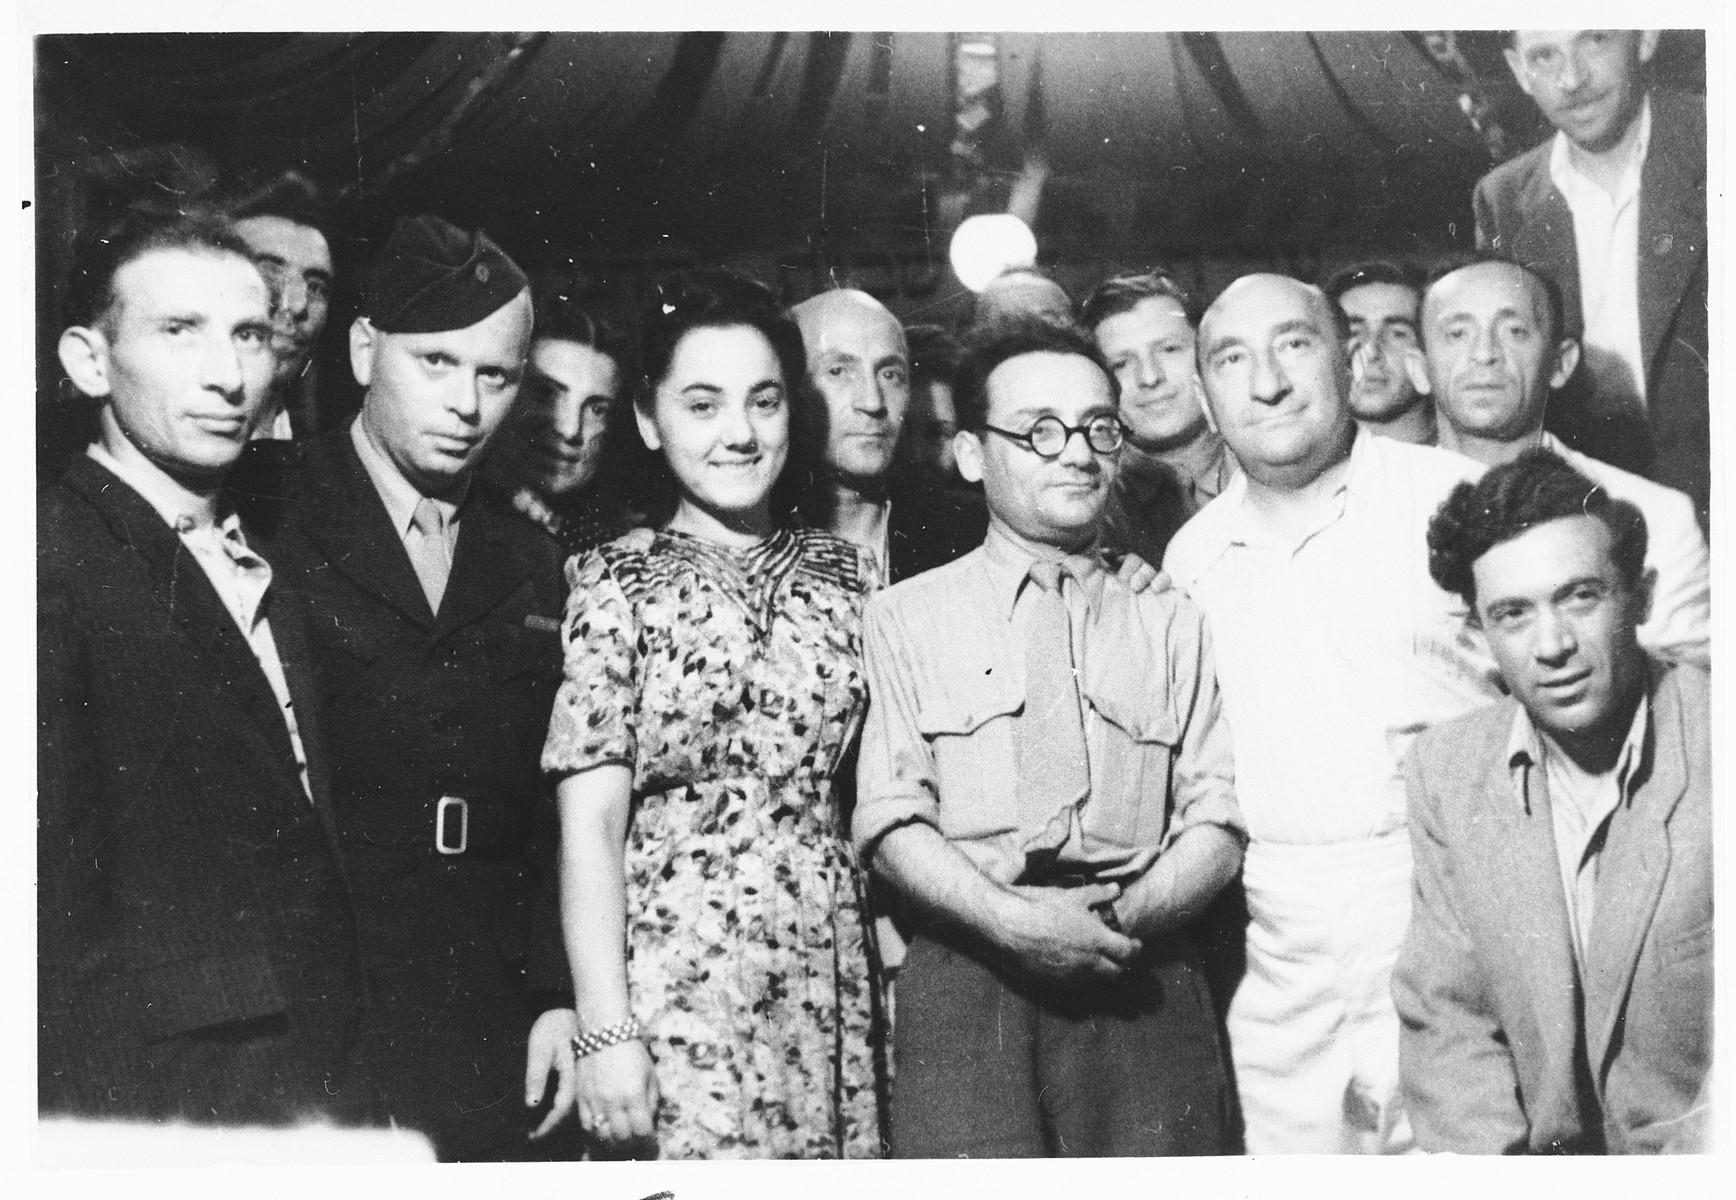 Group portrait of Jewish displaced persons in the Pocking camp.

Samuel Tick (the leader of Farband) is on the far left.  His wife Faiga Milchberg Tick is in the center. The gentleman standing in the front, center (wearing glasses) has been identified as Mr. Cyrlak.